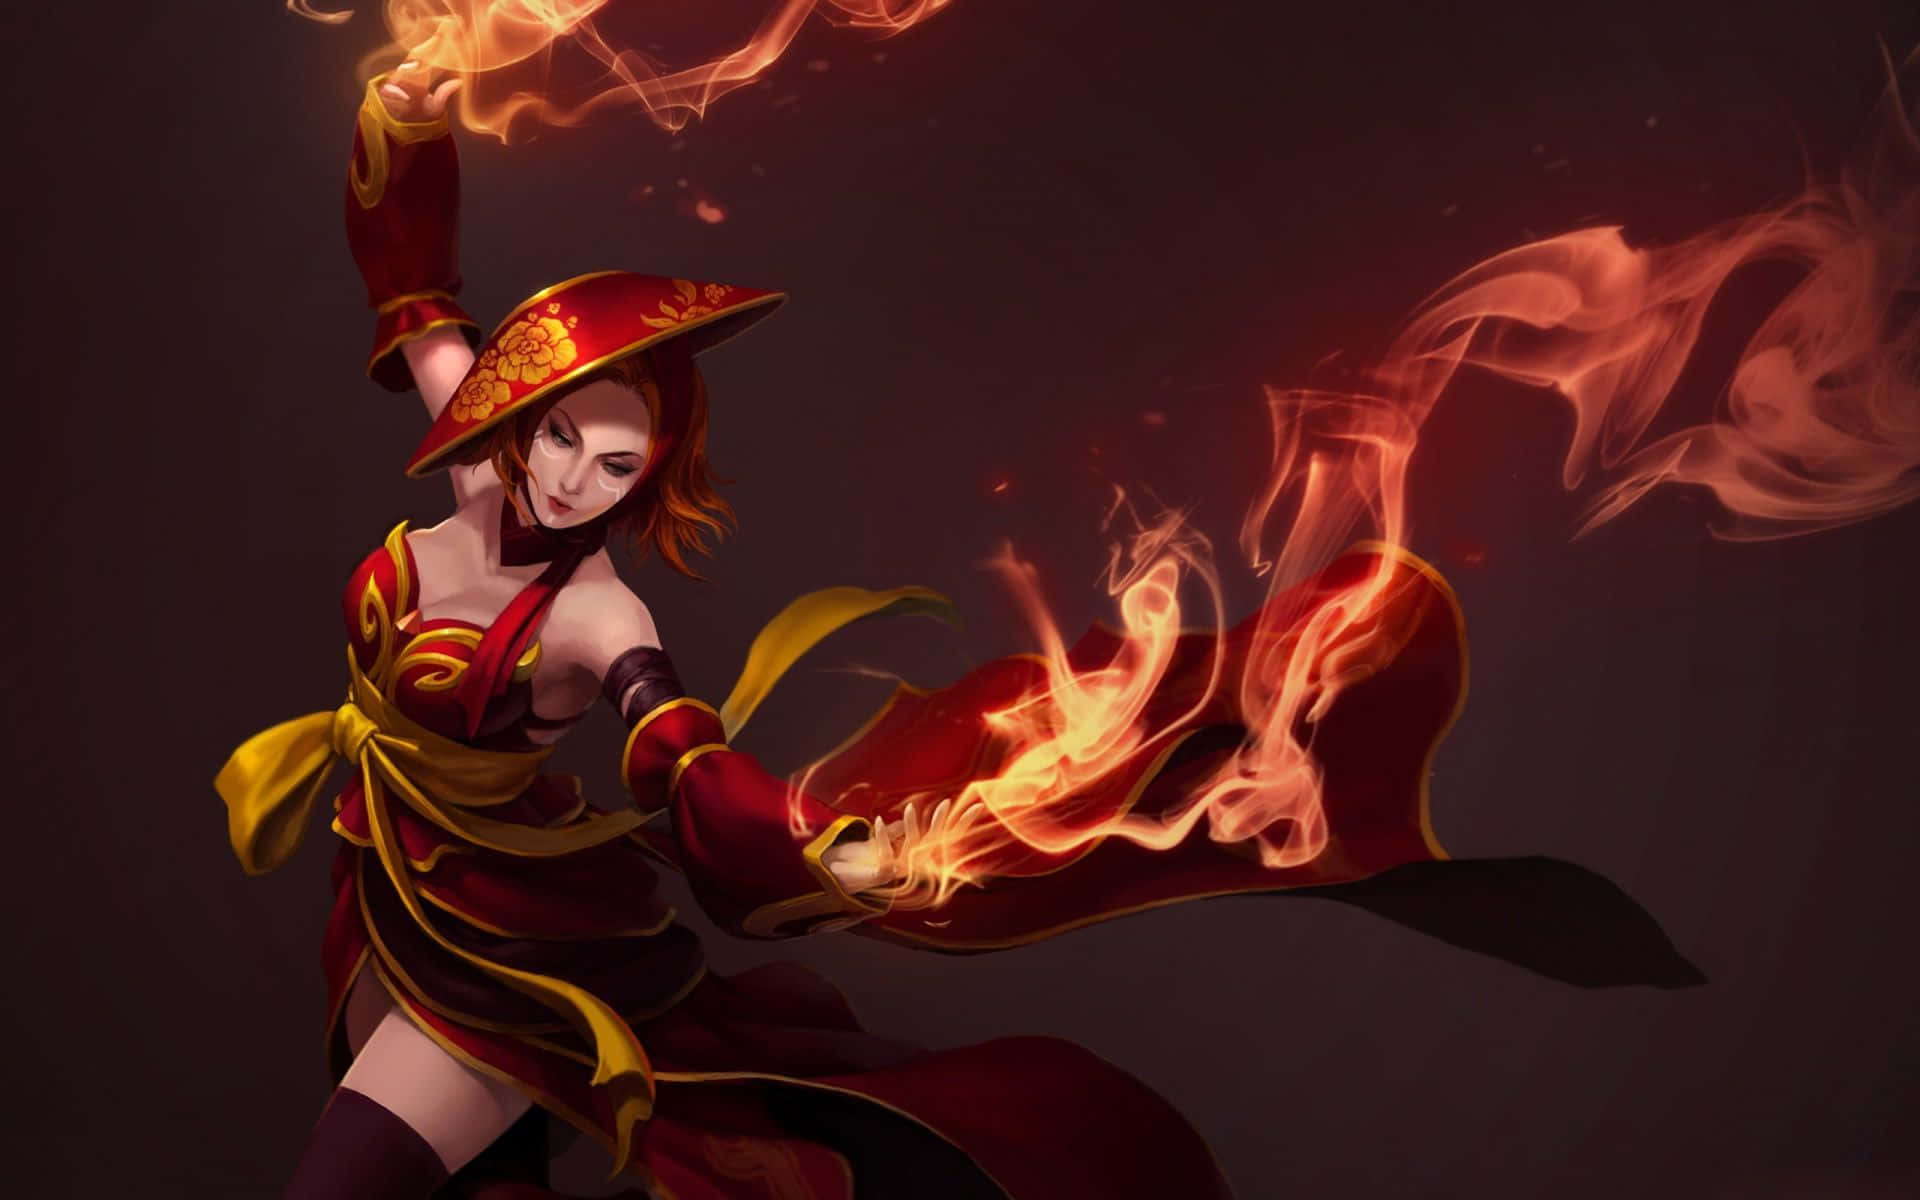 Lina, the Fiery Sorceress Unleashes Her Power in Dota 2 Wallpaper